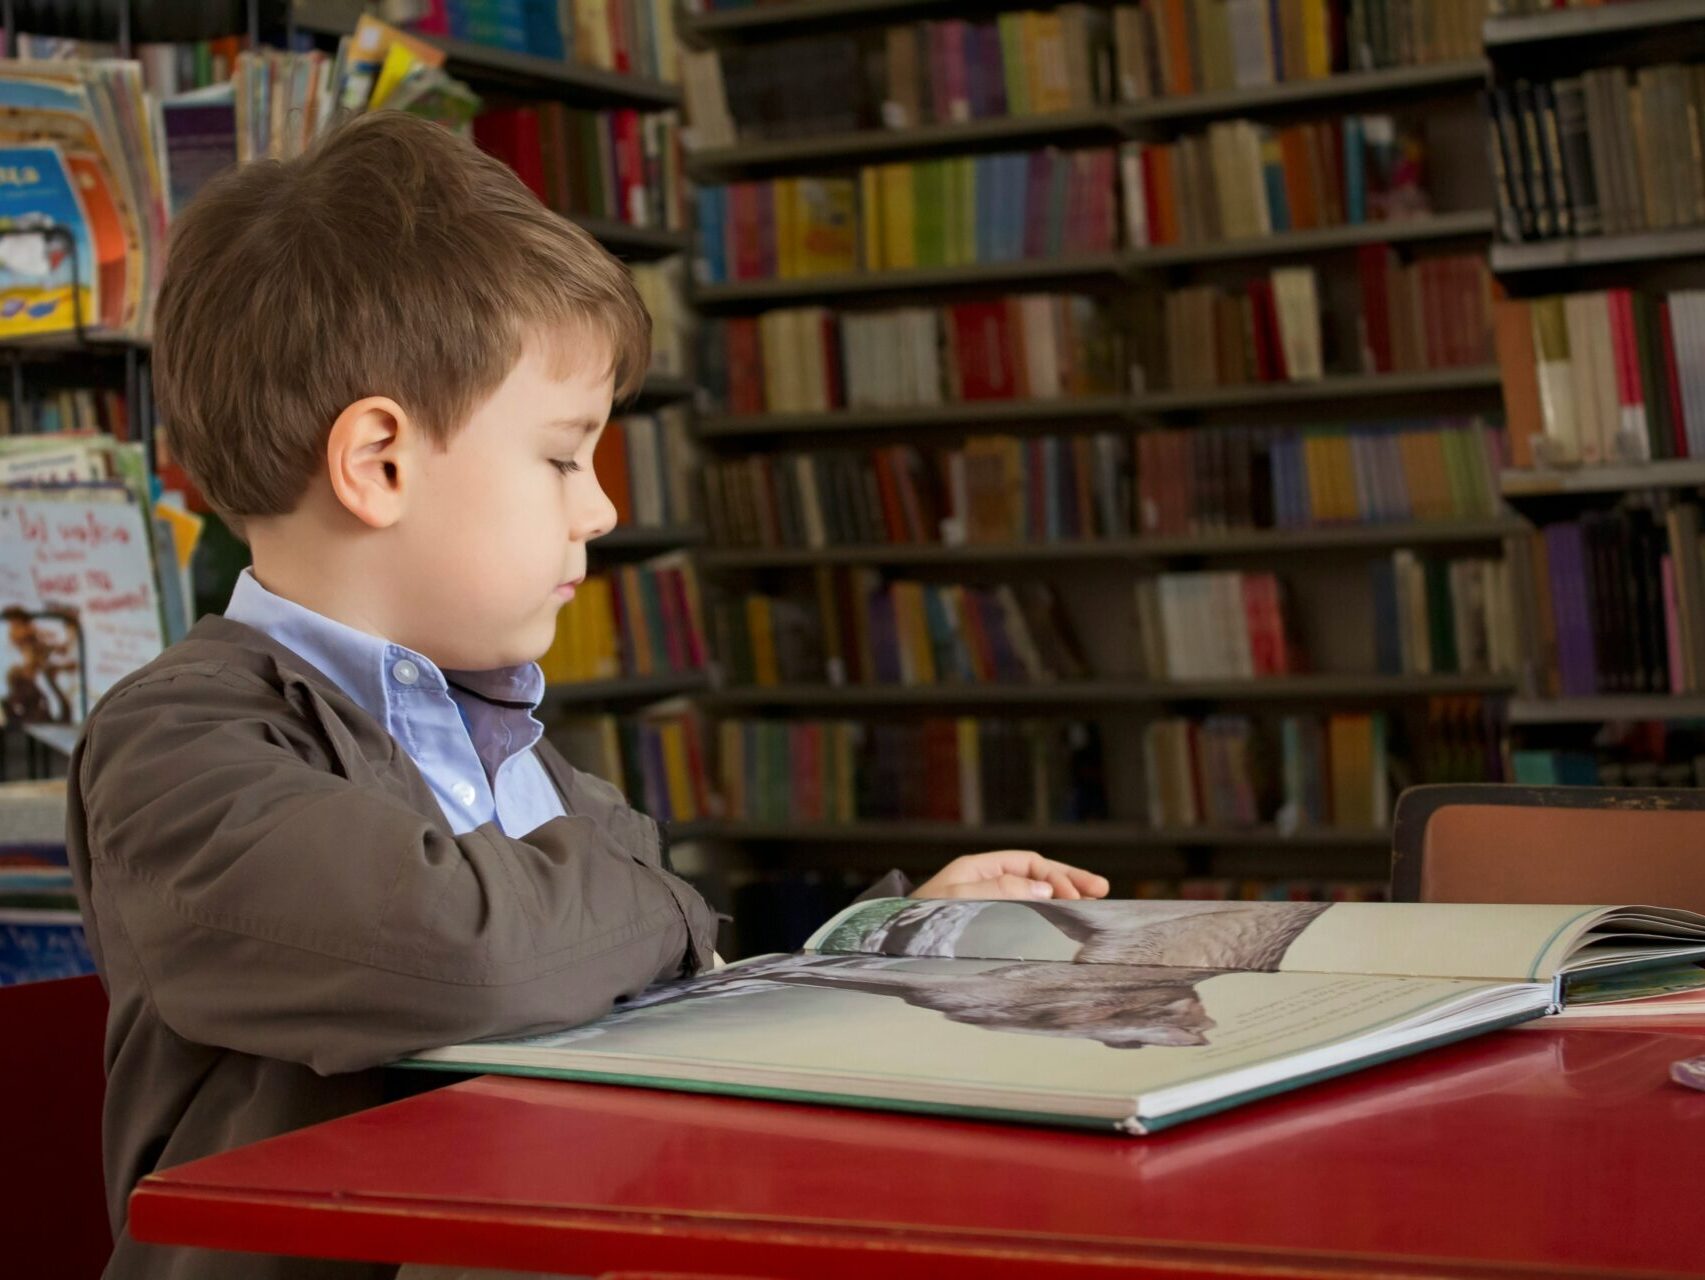 Young boy at red table in library, reading a book